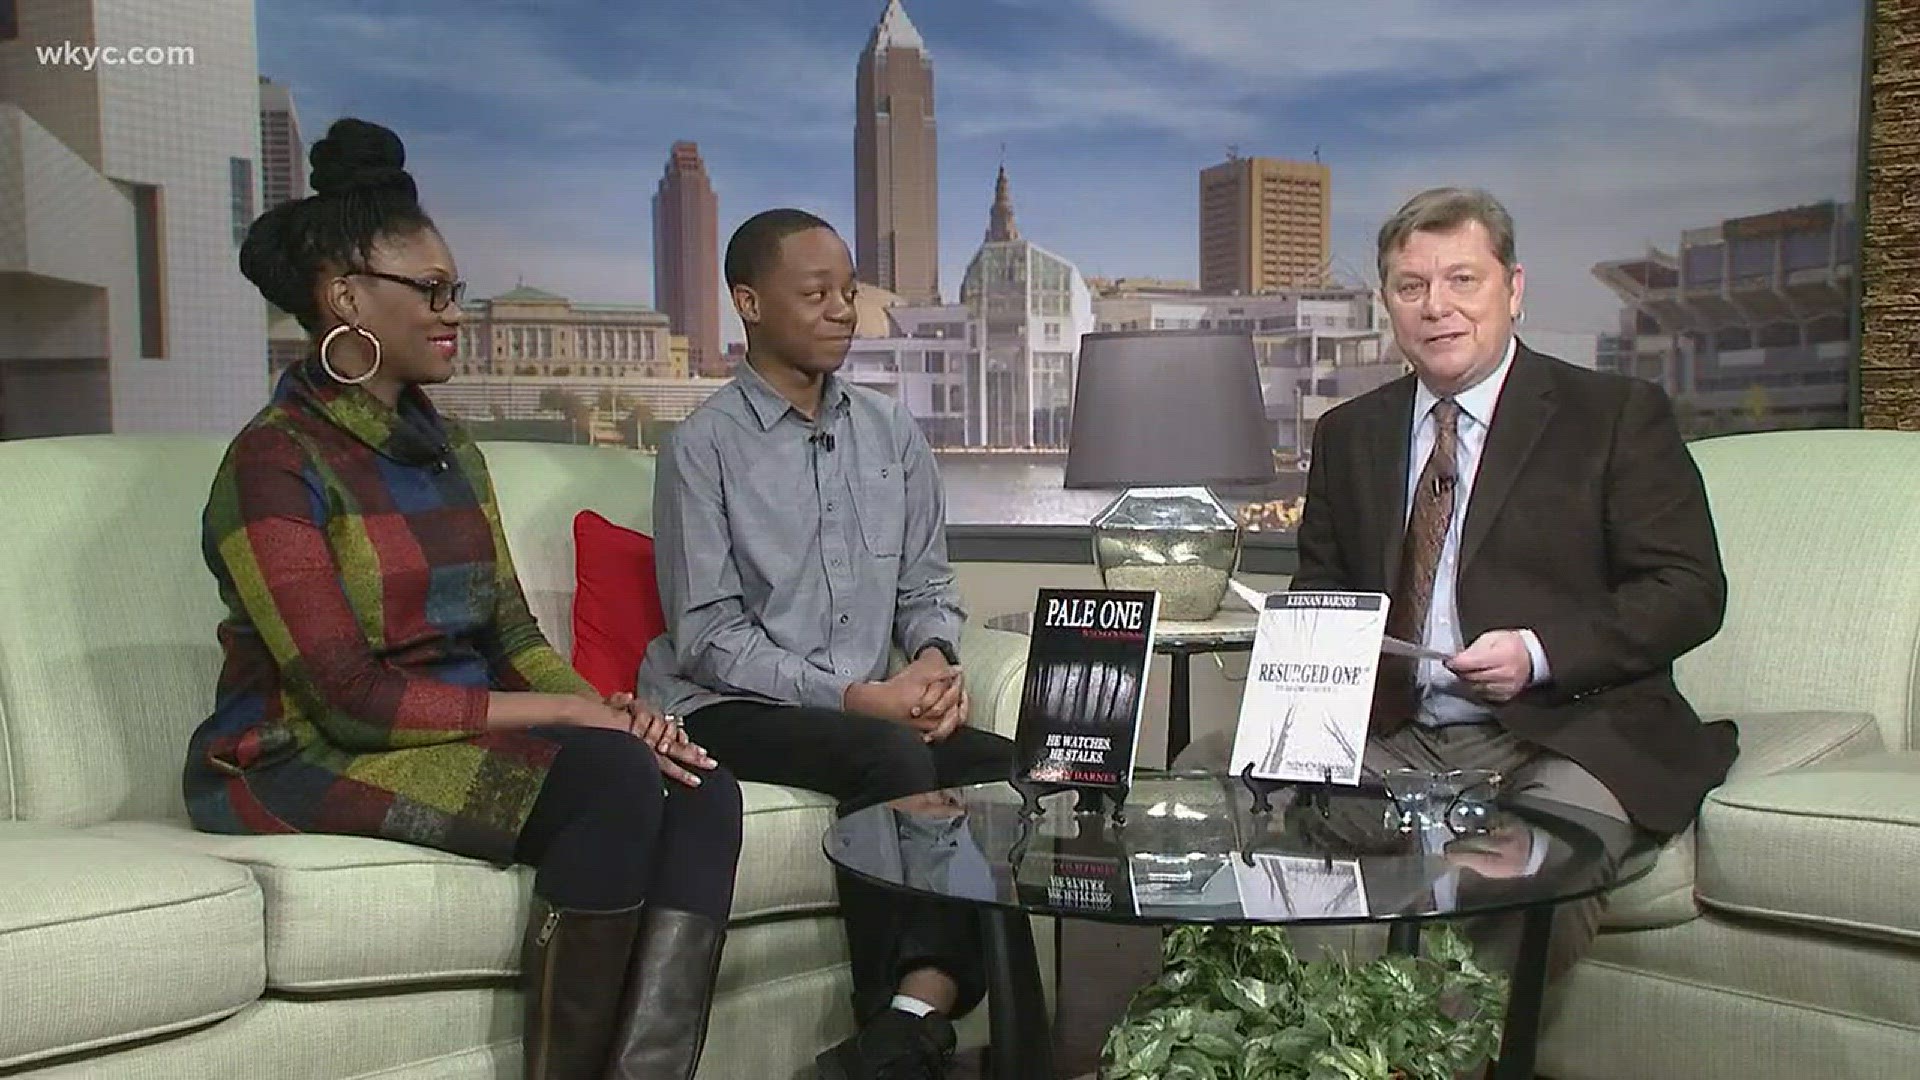 15-year-old Keenan Barnes discusses his published work and plans for more books.